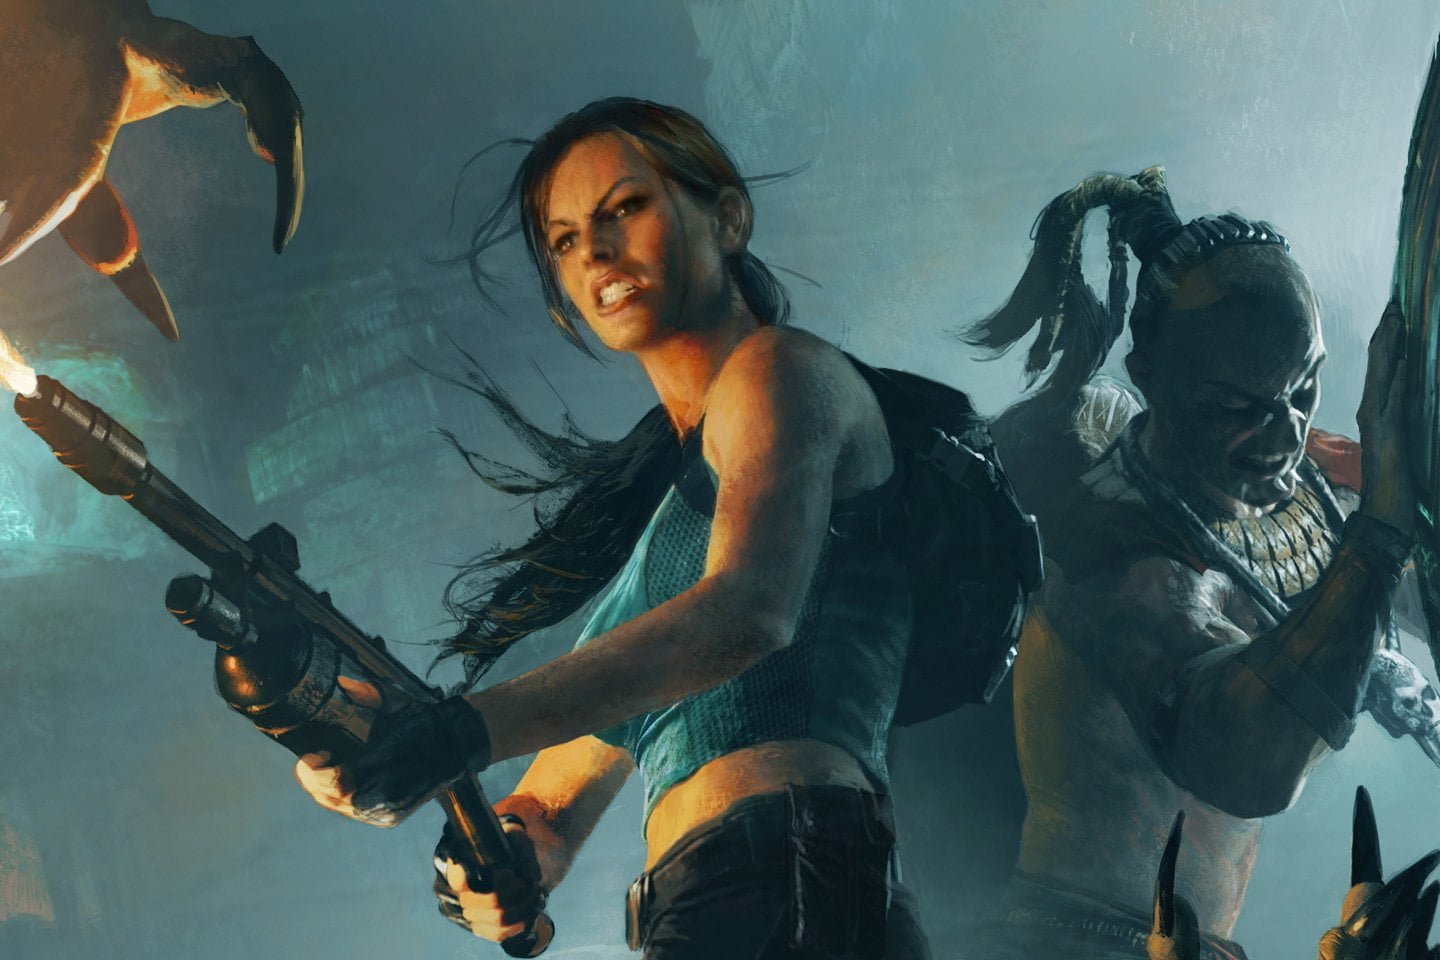 Review – Lara Croft and the Guardian of Light